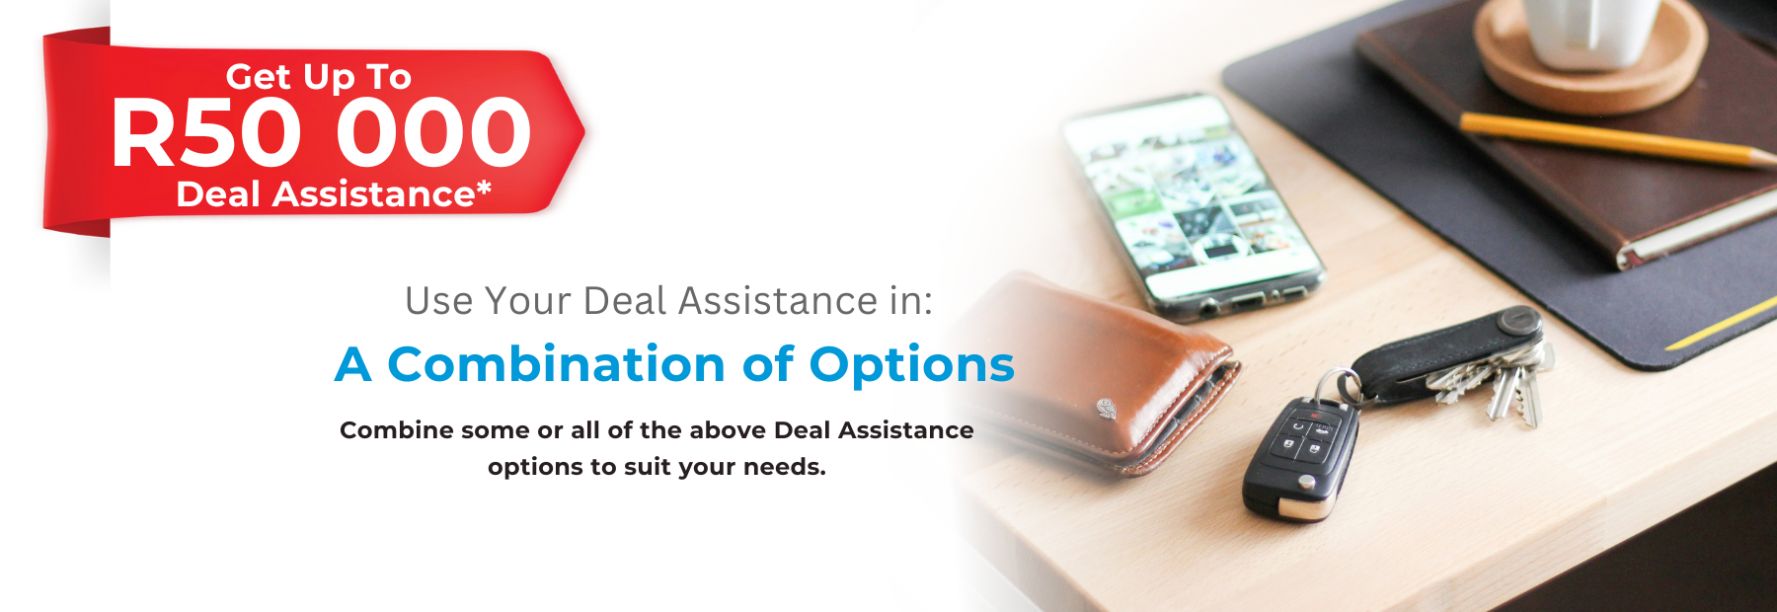 Deal Assistance Combinations